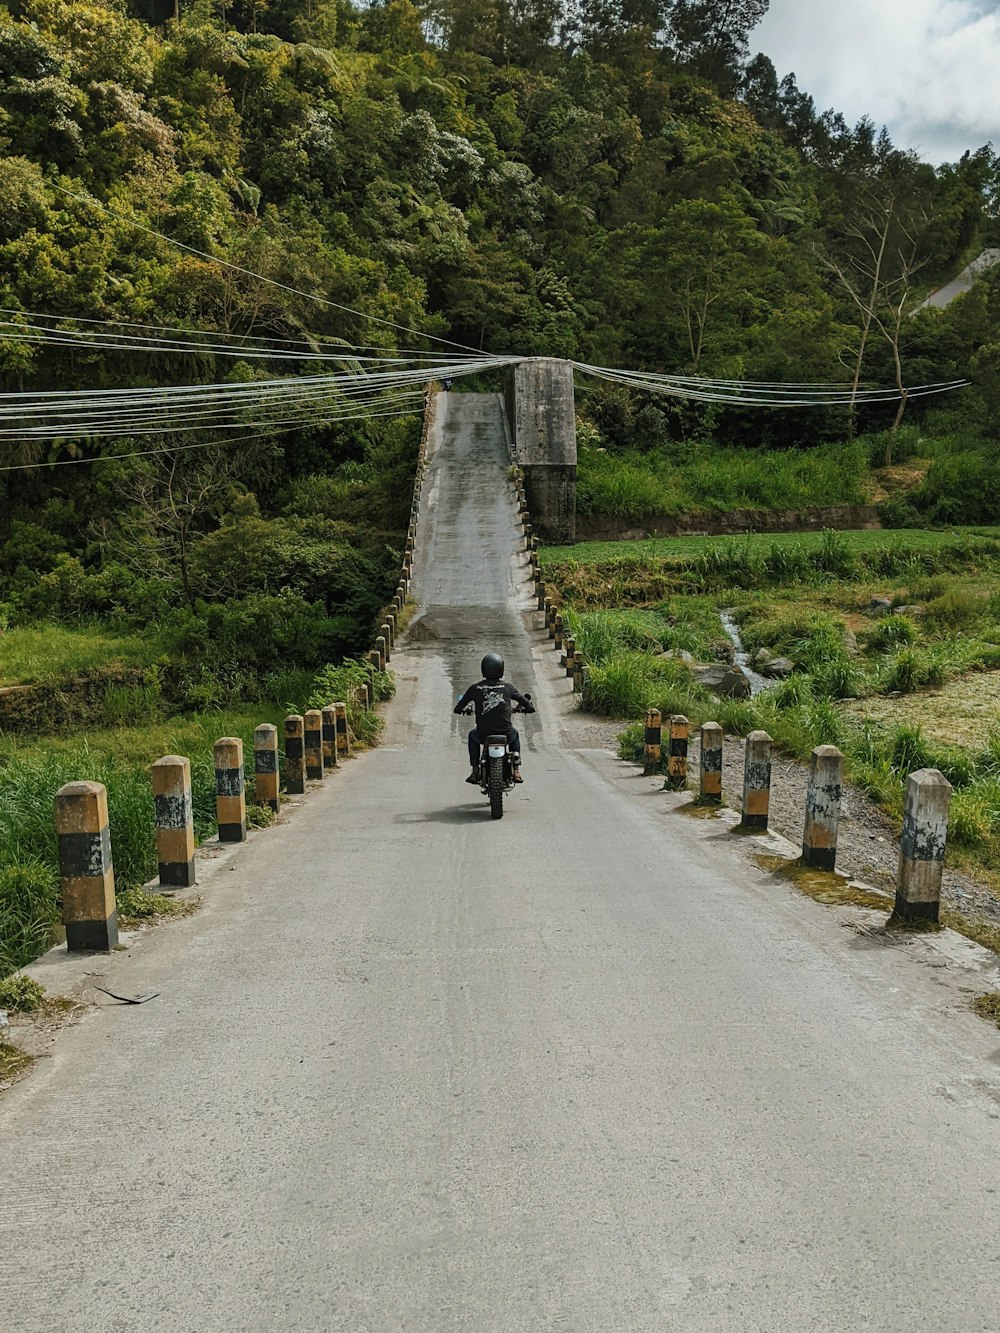 a person riding a motorcycle down a road